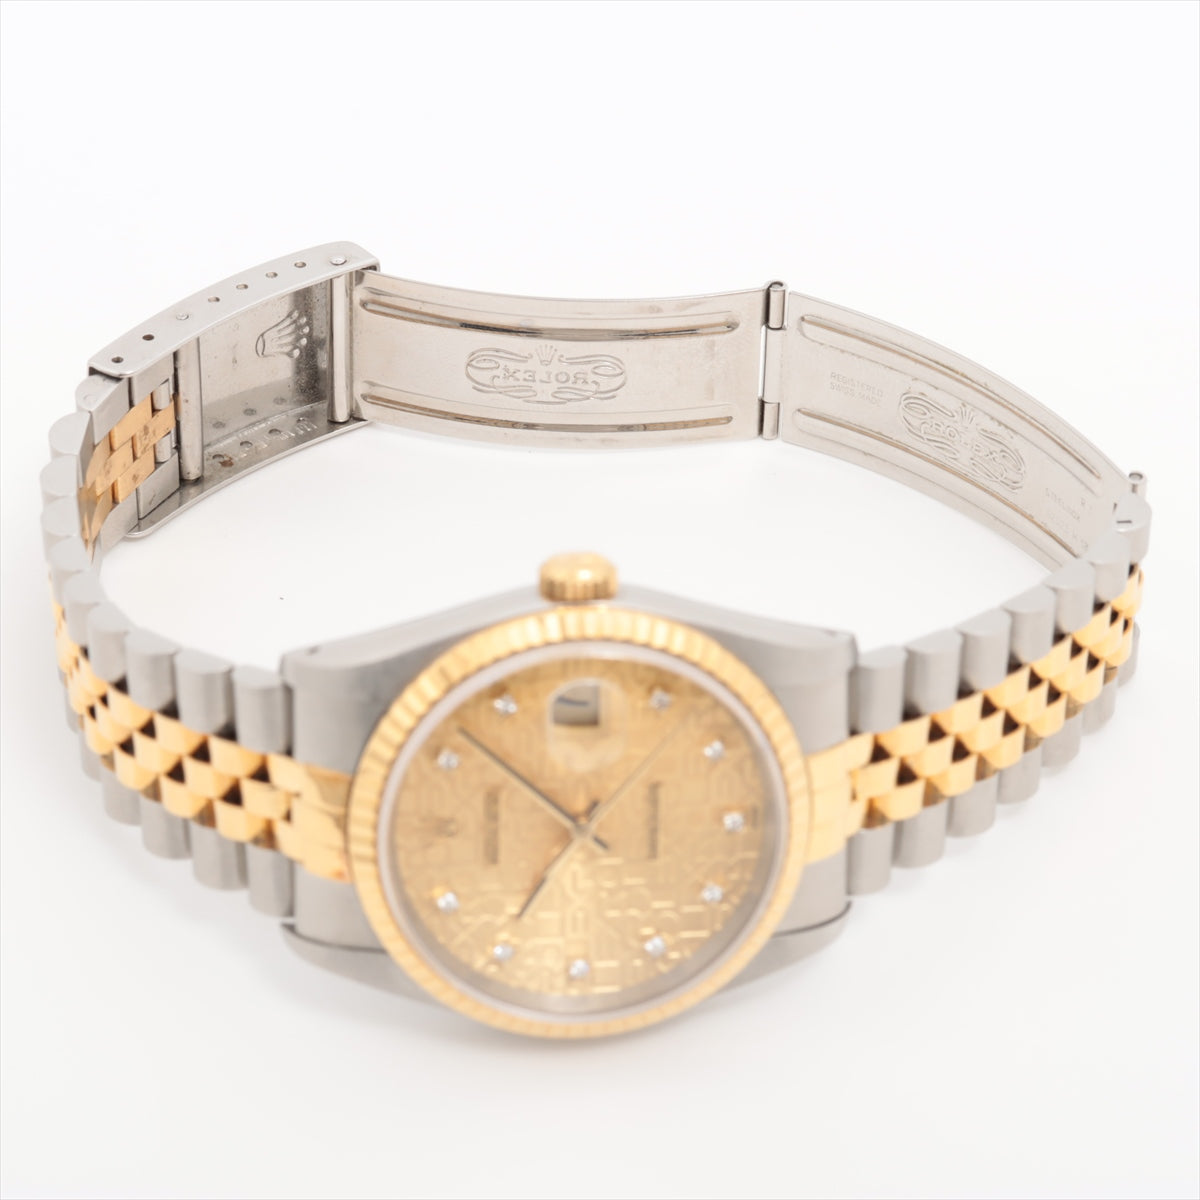 Rolex Datejust 16233G SSYG AT Champagne Hologram  s Too Much